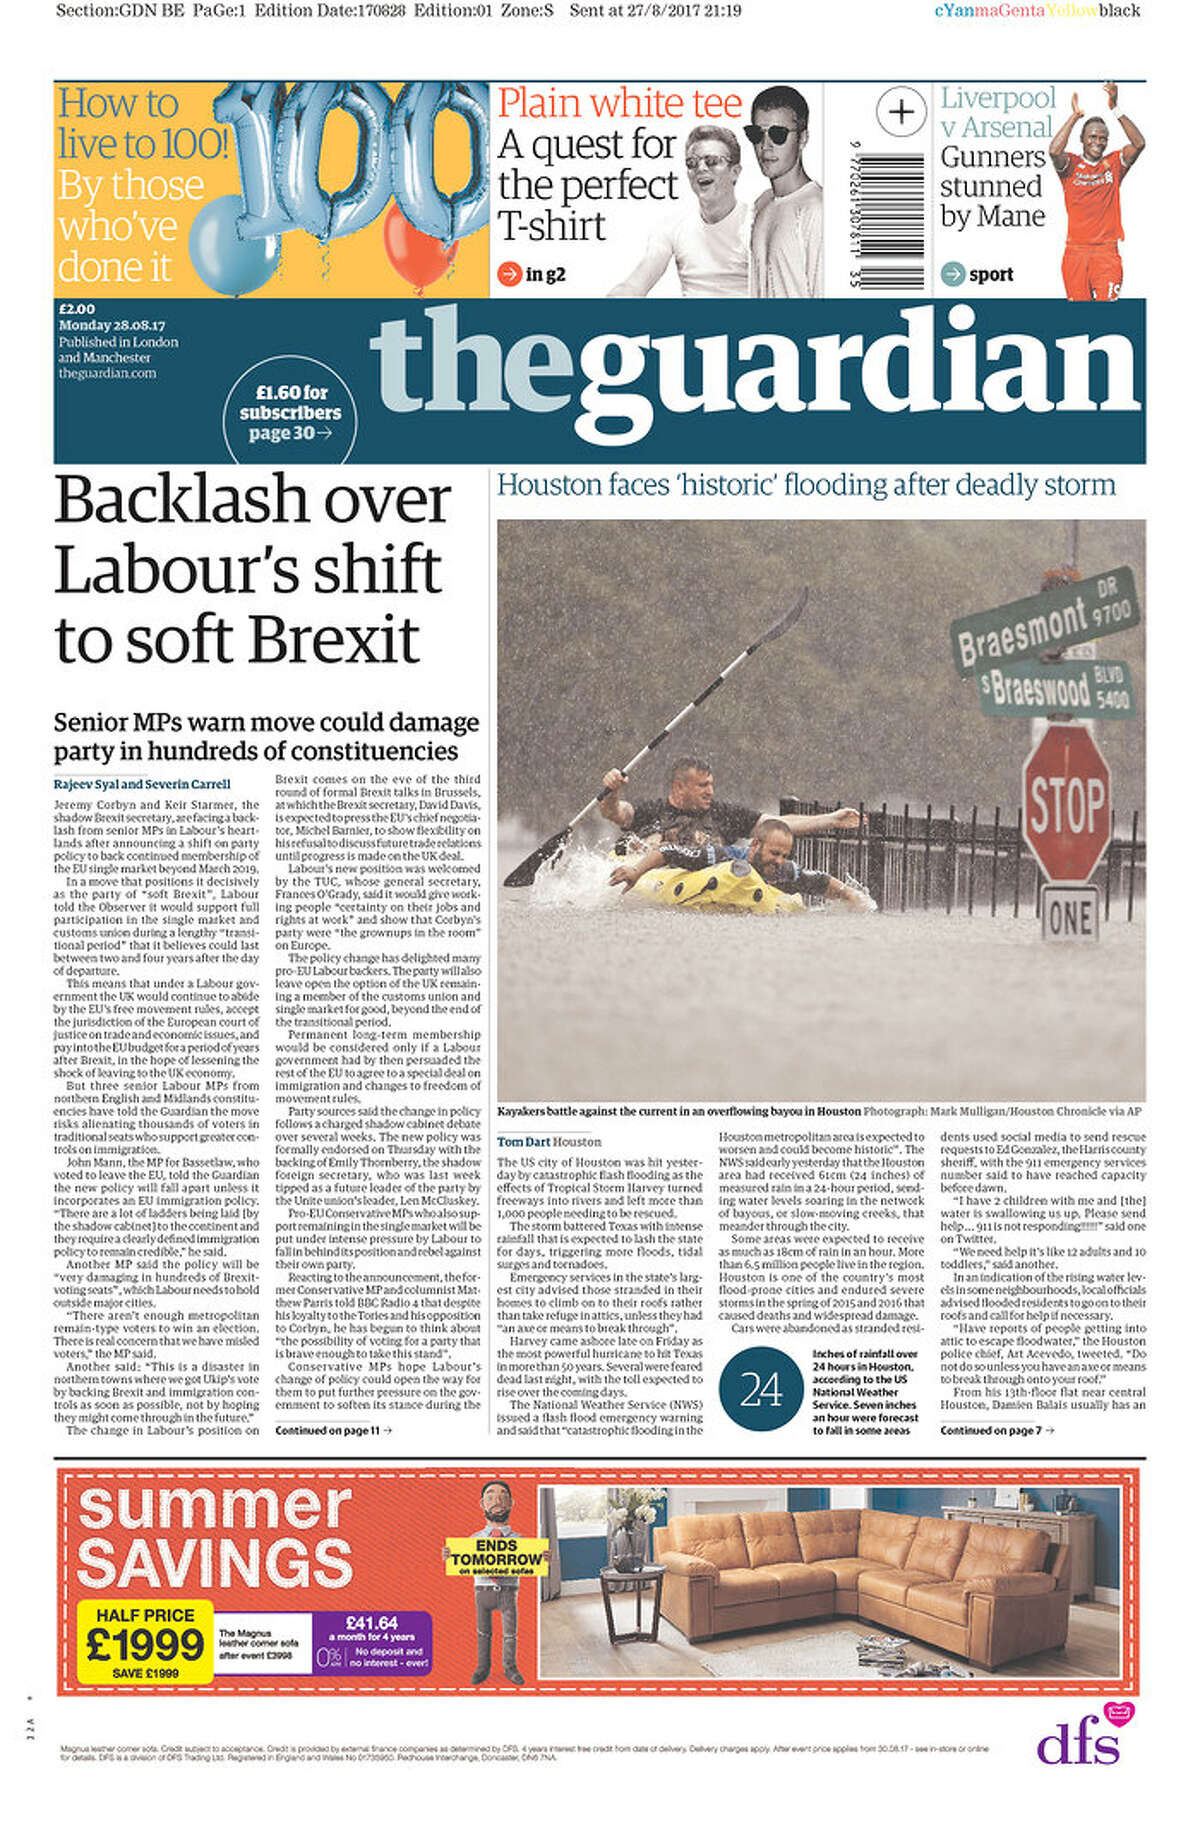 The Guardian: London, UK Front pages from Texas and beyond for Monday, Aug. 28, 2017, show how newspapers covered the catastrophic floods in Houston due to Tropical Storm Harvey.